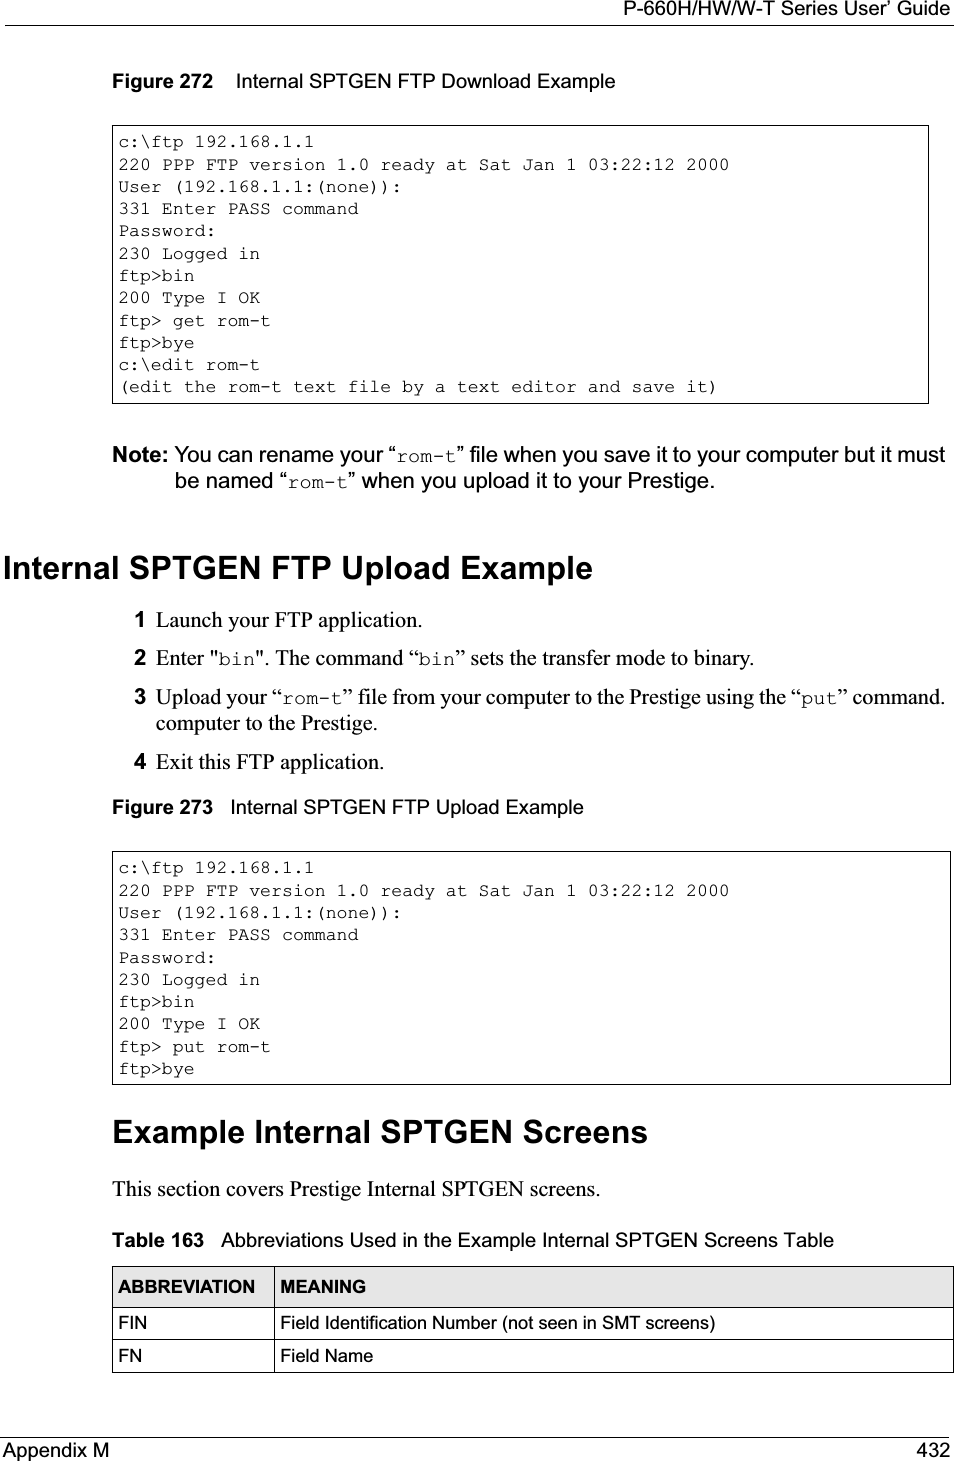 P-660H/HW/W-T Series User’ GuideAppendix M 432Figure 272    Internal SPTGEN FTP Download ExampleNote: You can rename your “rom-t” file when you save it to your computer but it must be named “rom-t” when you upload it to your Prestige.Internal SPTGEN FTP Upload Example1Launch your FTP application.2Enter &quot;bin&quot;. The command “bin” sets the transfer mode to binary.3Upload your “rom-t” file from your computer to the Prestige using the “put” command. computer to the Prestige.4Exit this FTP application.Figure 273   Internal SPTGEN FTP Upload ExampleExample Internal SPTGEN Screens This section covers Prestige Internal SPTGEN screens. c:\ftp 192.168.1.1220 PPP FTP version 1.0 ready at Sat Jan 1 03:22:12 2000User (192.168.1.1:(none)):331 Enter PASS commandPassword:230 Logged inftp&gt;bin200 Type I OKftp&gt; get rom-tftp&gt;byec:\edit rom-t(edit the rom-t text file by a text editor and save it)c:\ftp 192.168.1.1220 PPP FTP version 1.0 ready at Sat Jan 1 03:22:12 2000User (192.168.1.1:(none)):331 Enter PASS commandPassword:230 Logged inftp&gt;bin200 Type I OKftp&gt; put rom-tftp&gt;byeTable 163   Abbreviations Used in the Example Internal SPTGEN Screens TableABBREVIATION MEANINGFIN Field Identification Number (not seen in SMT screens)FN Field Name